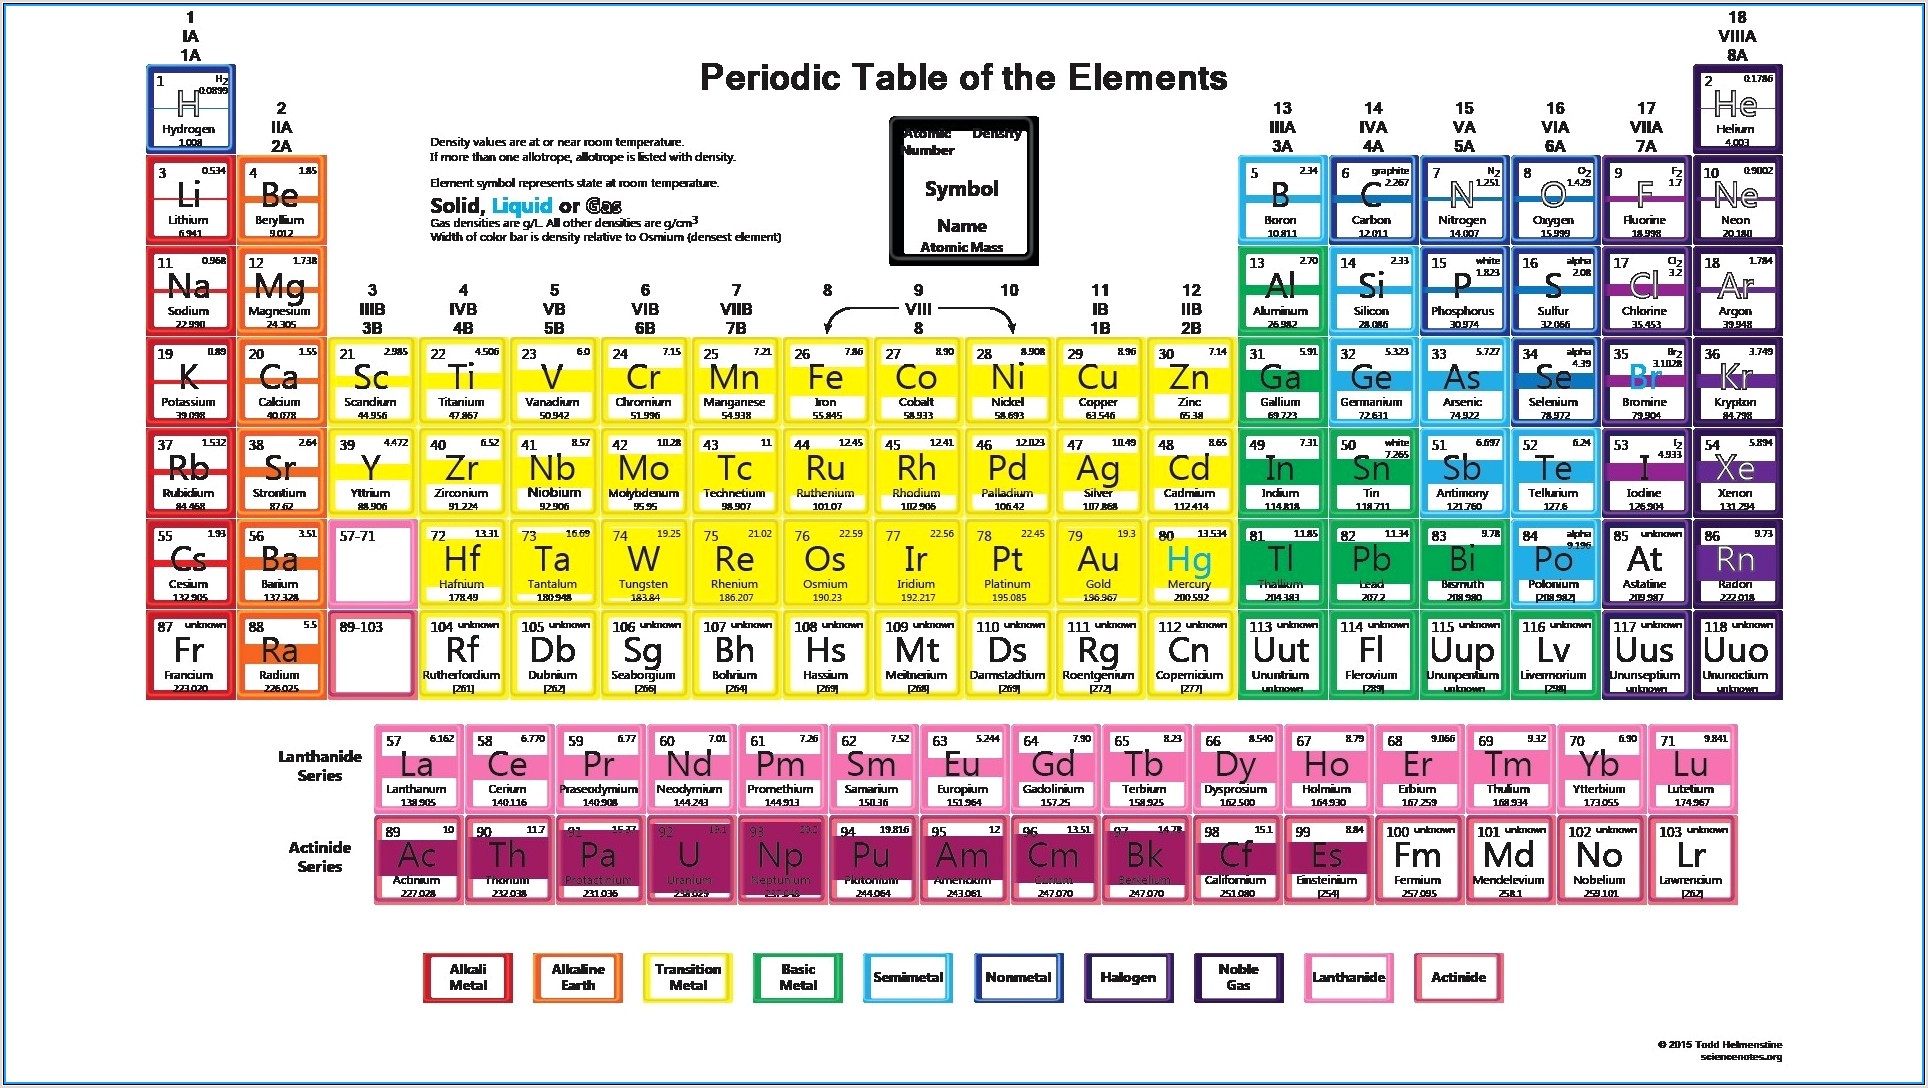 periodic-table-of-elements-worksheet-with-answers-worksheet-restiumani-resume-wky1wx4dlj